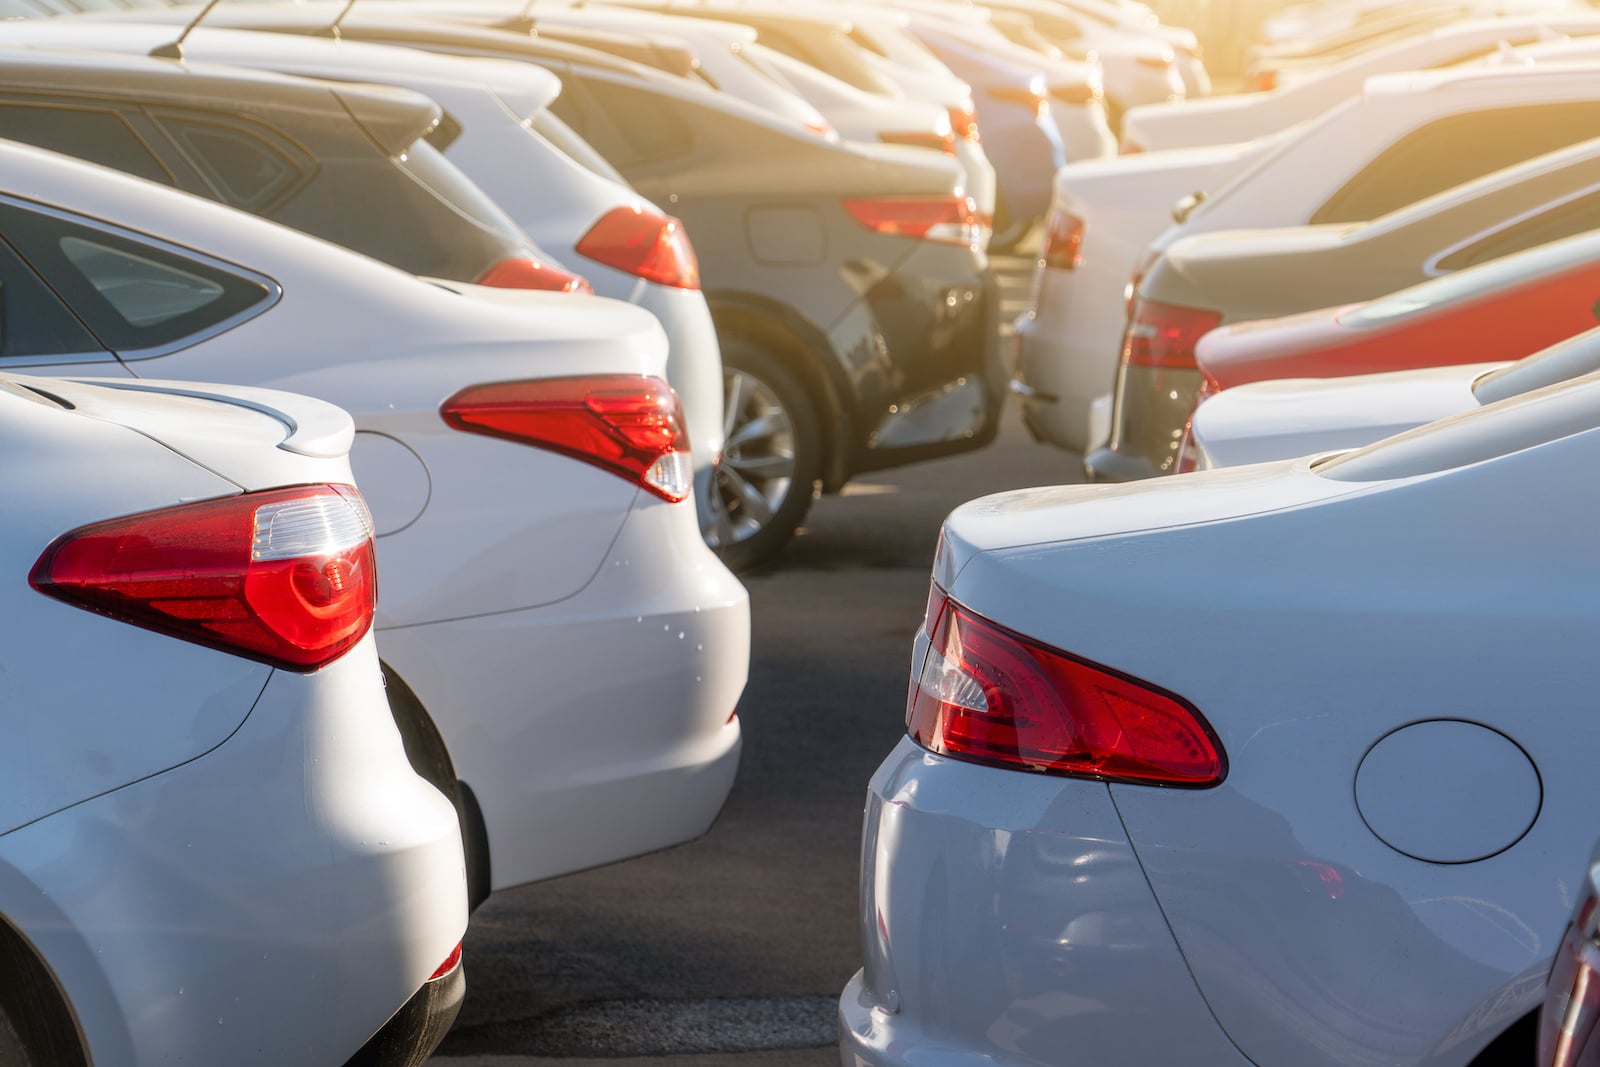 Used Car Inventory Dropping as Prices Keep Falling